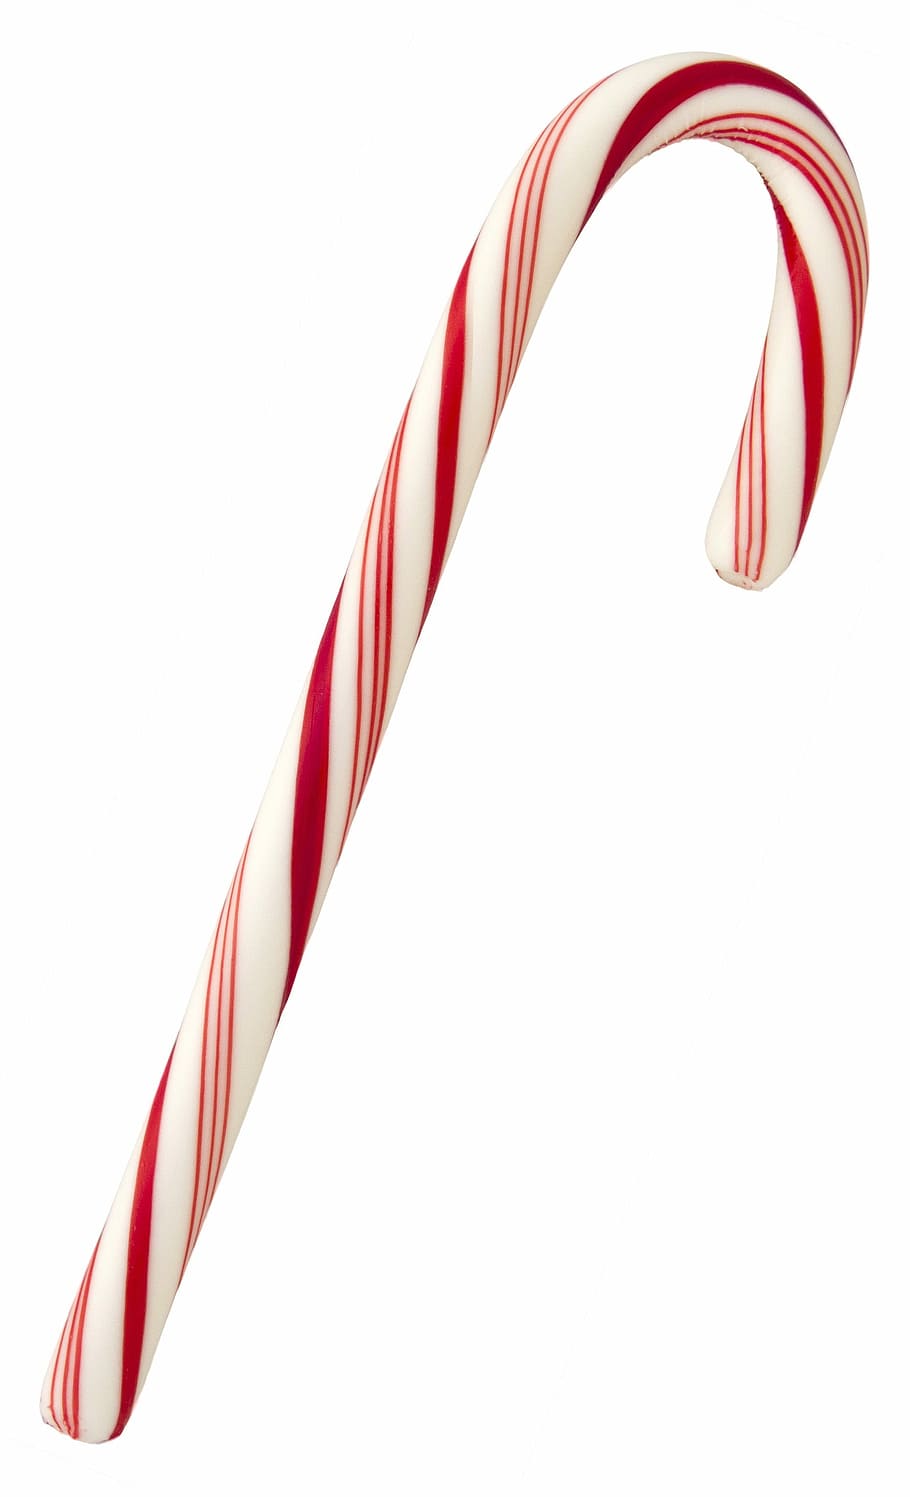 traditional, christmas candy canes, Christmas, Candy Canes, decorations, photos, holidays, public domain, red and white, candy Cane